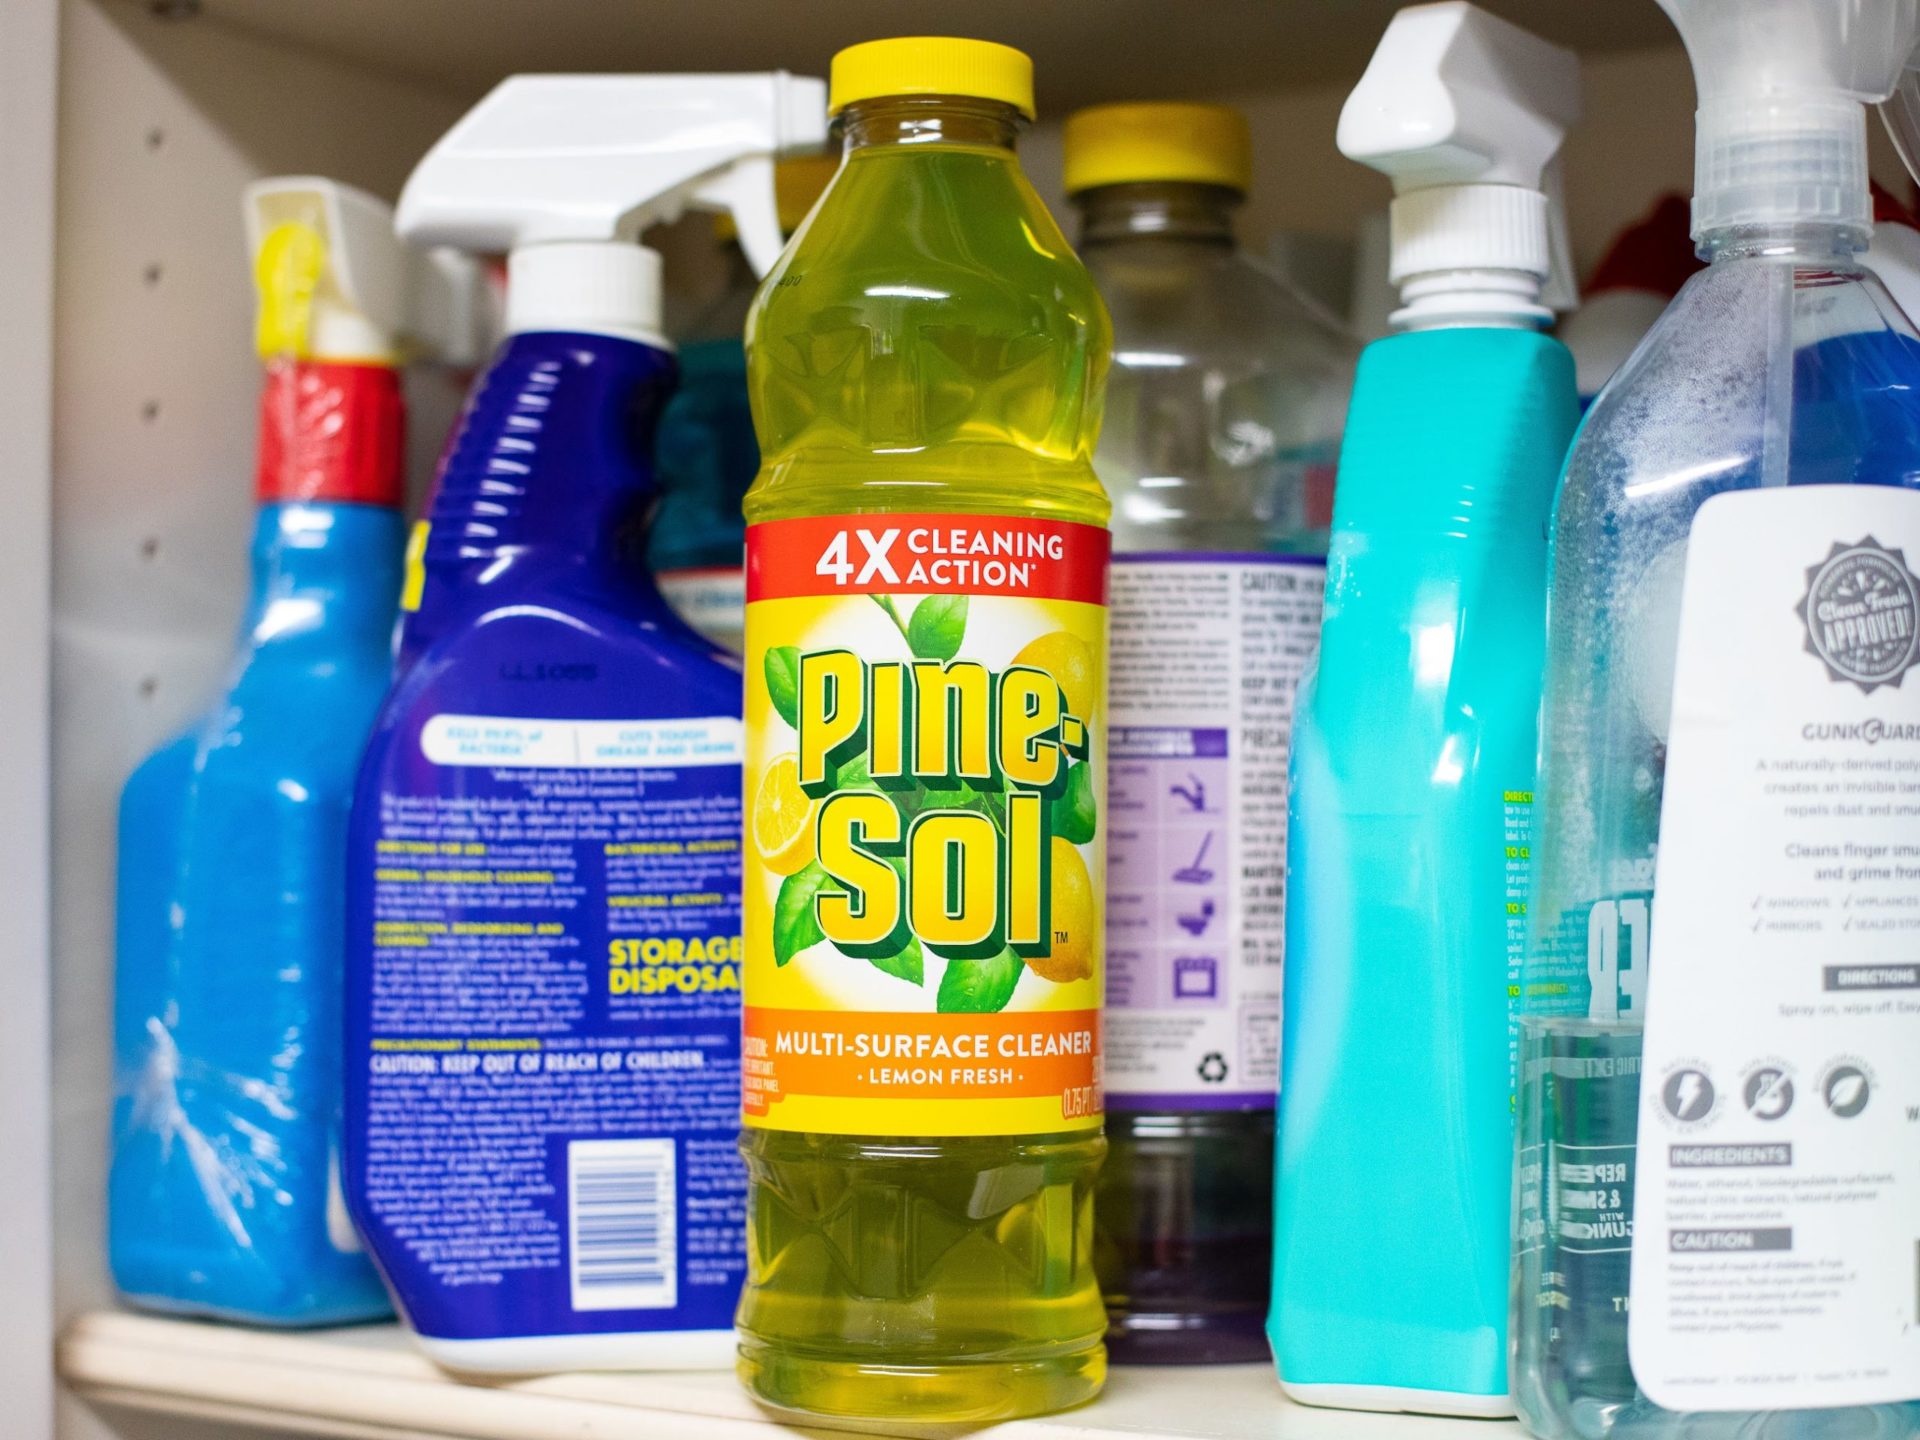 Pine-Sol Multi Surface Cleaner Only $2.99 At Kroger